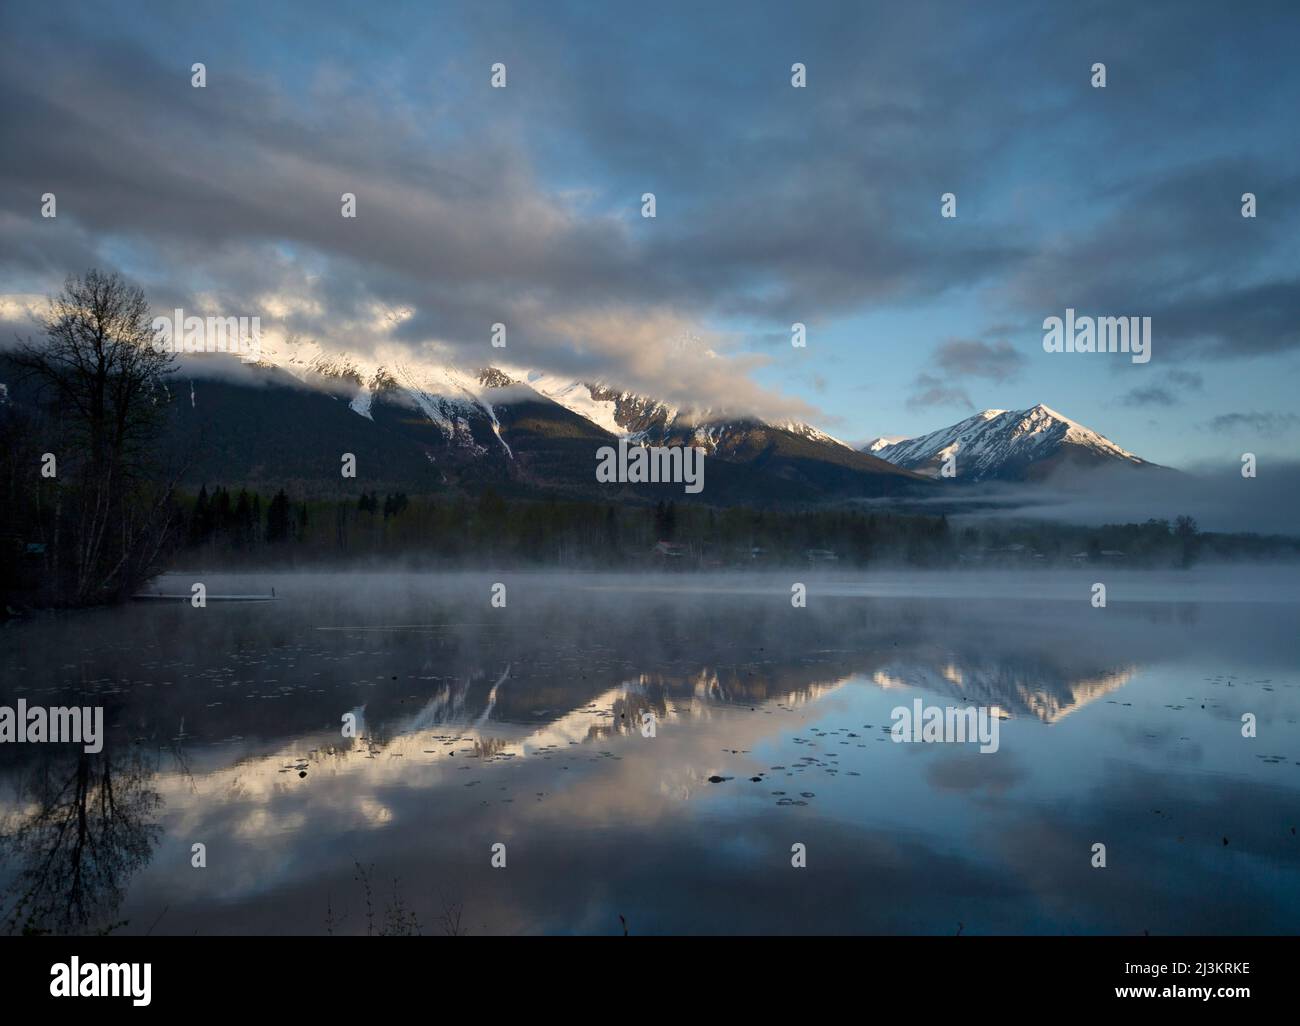 Rugged peak of Hudson Bay Mountain covered in snow with mist rising off the lake in the foreground at sunrise; Smithers, British Columbia, Canada Stock Photo